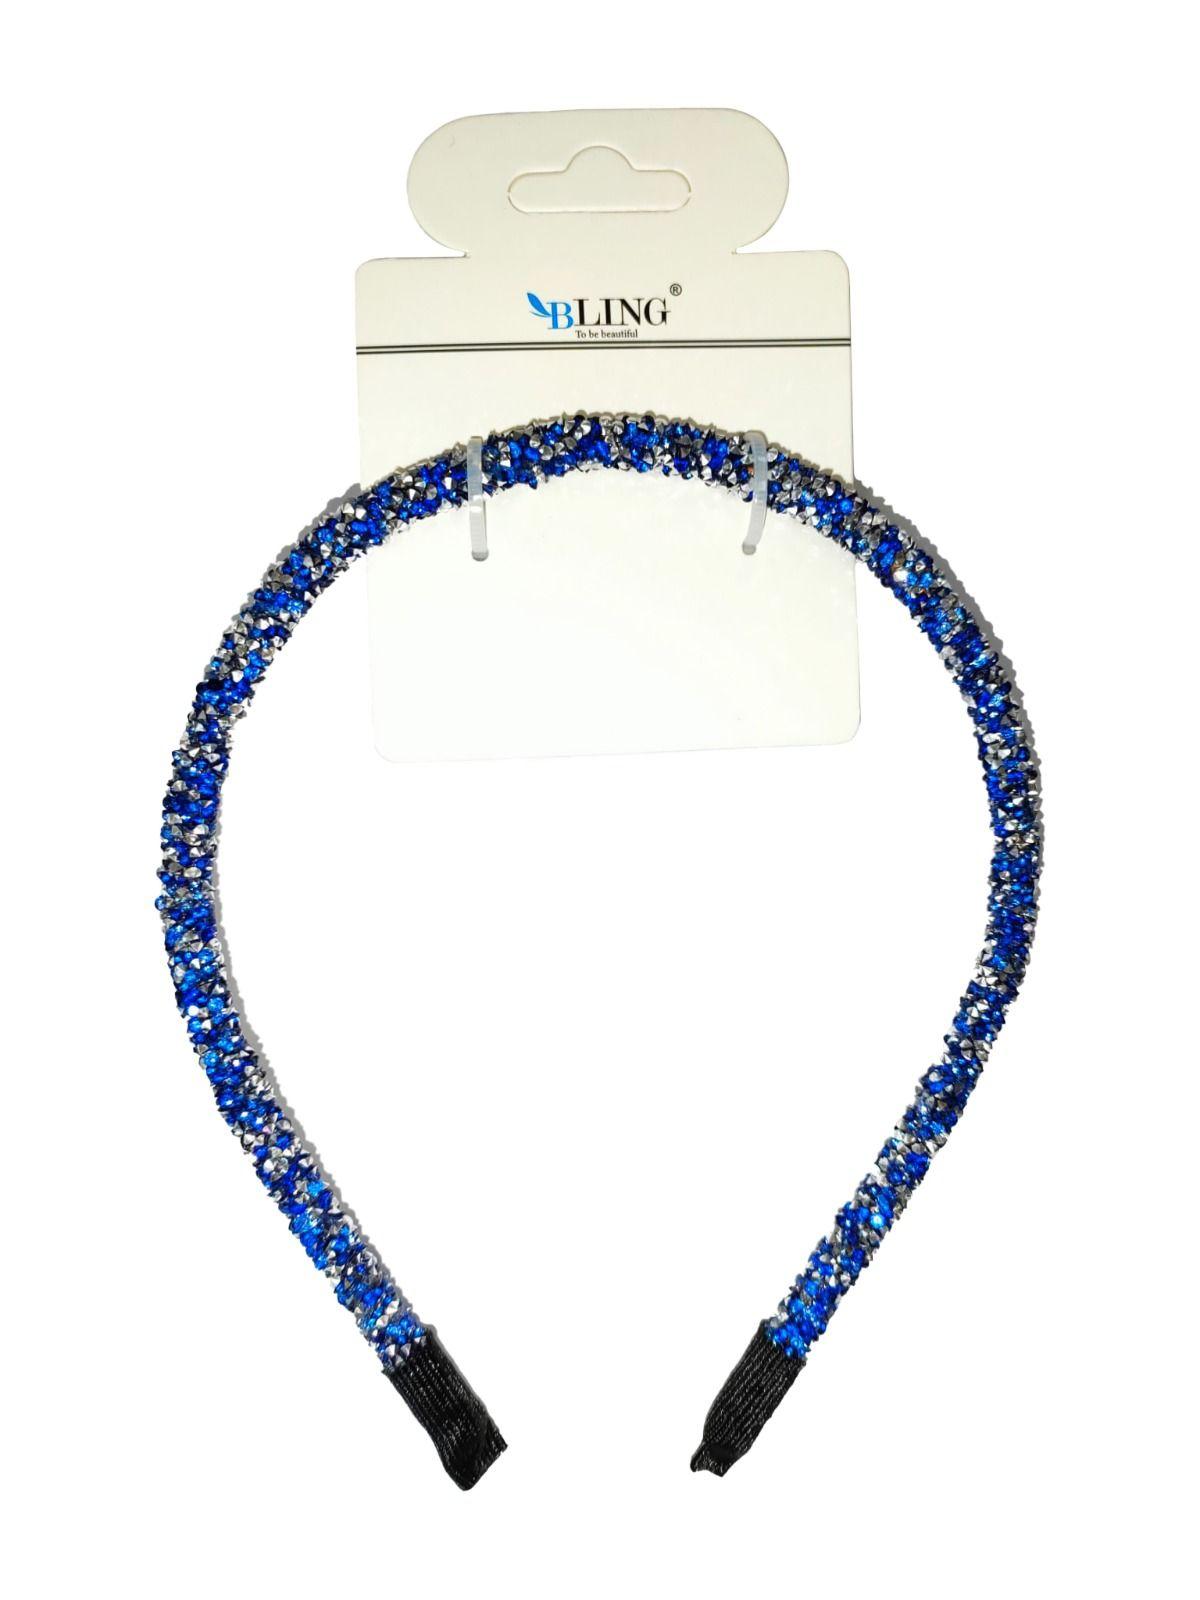 BLING hairband with dewlap crystals - blue silver